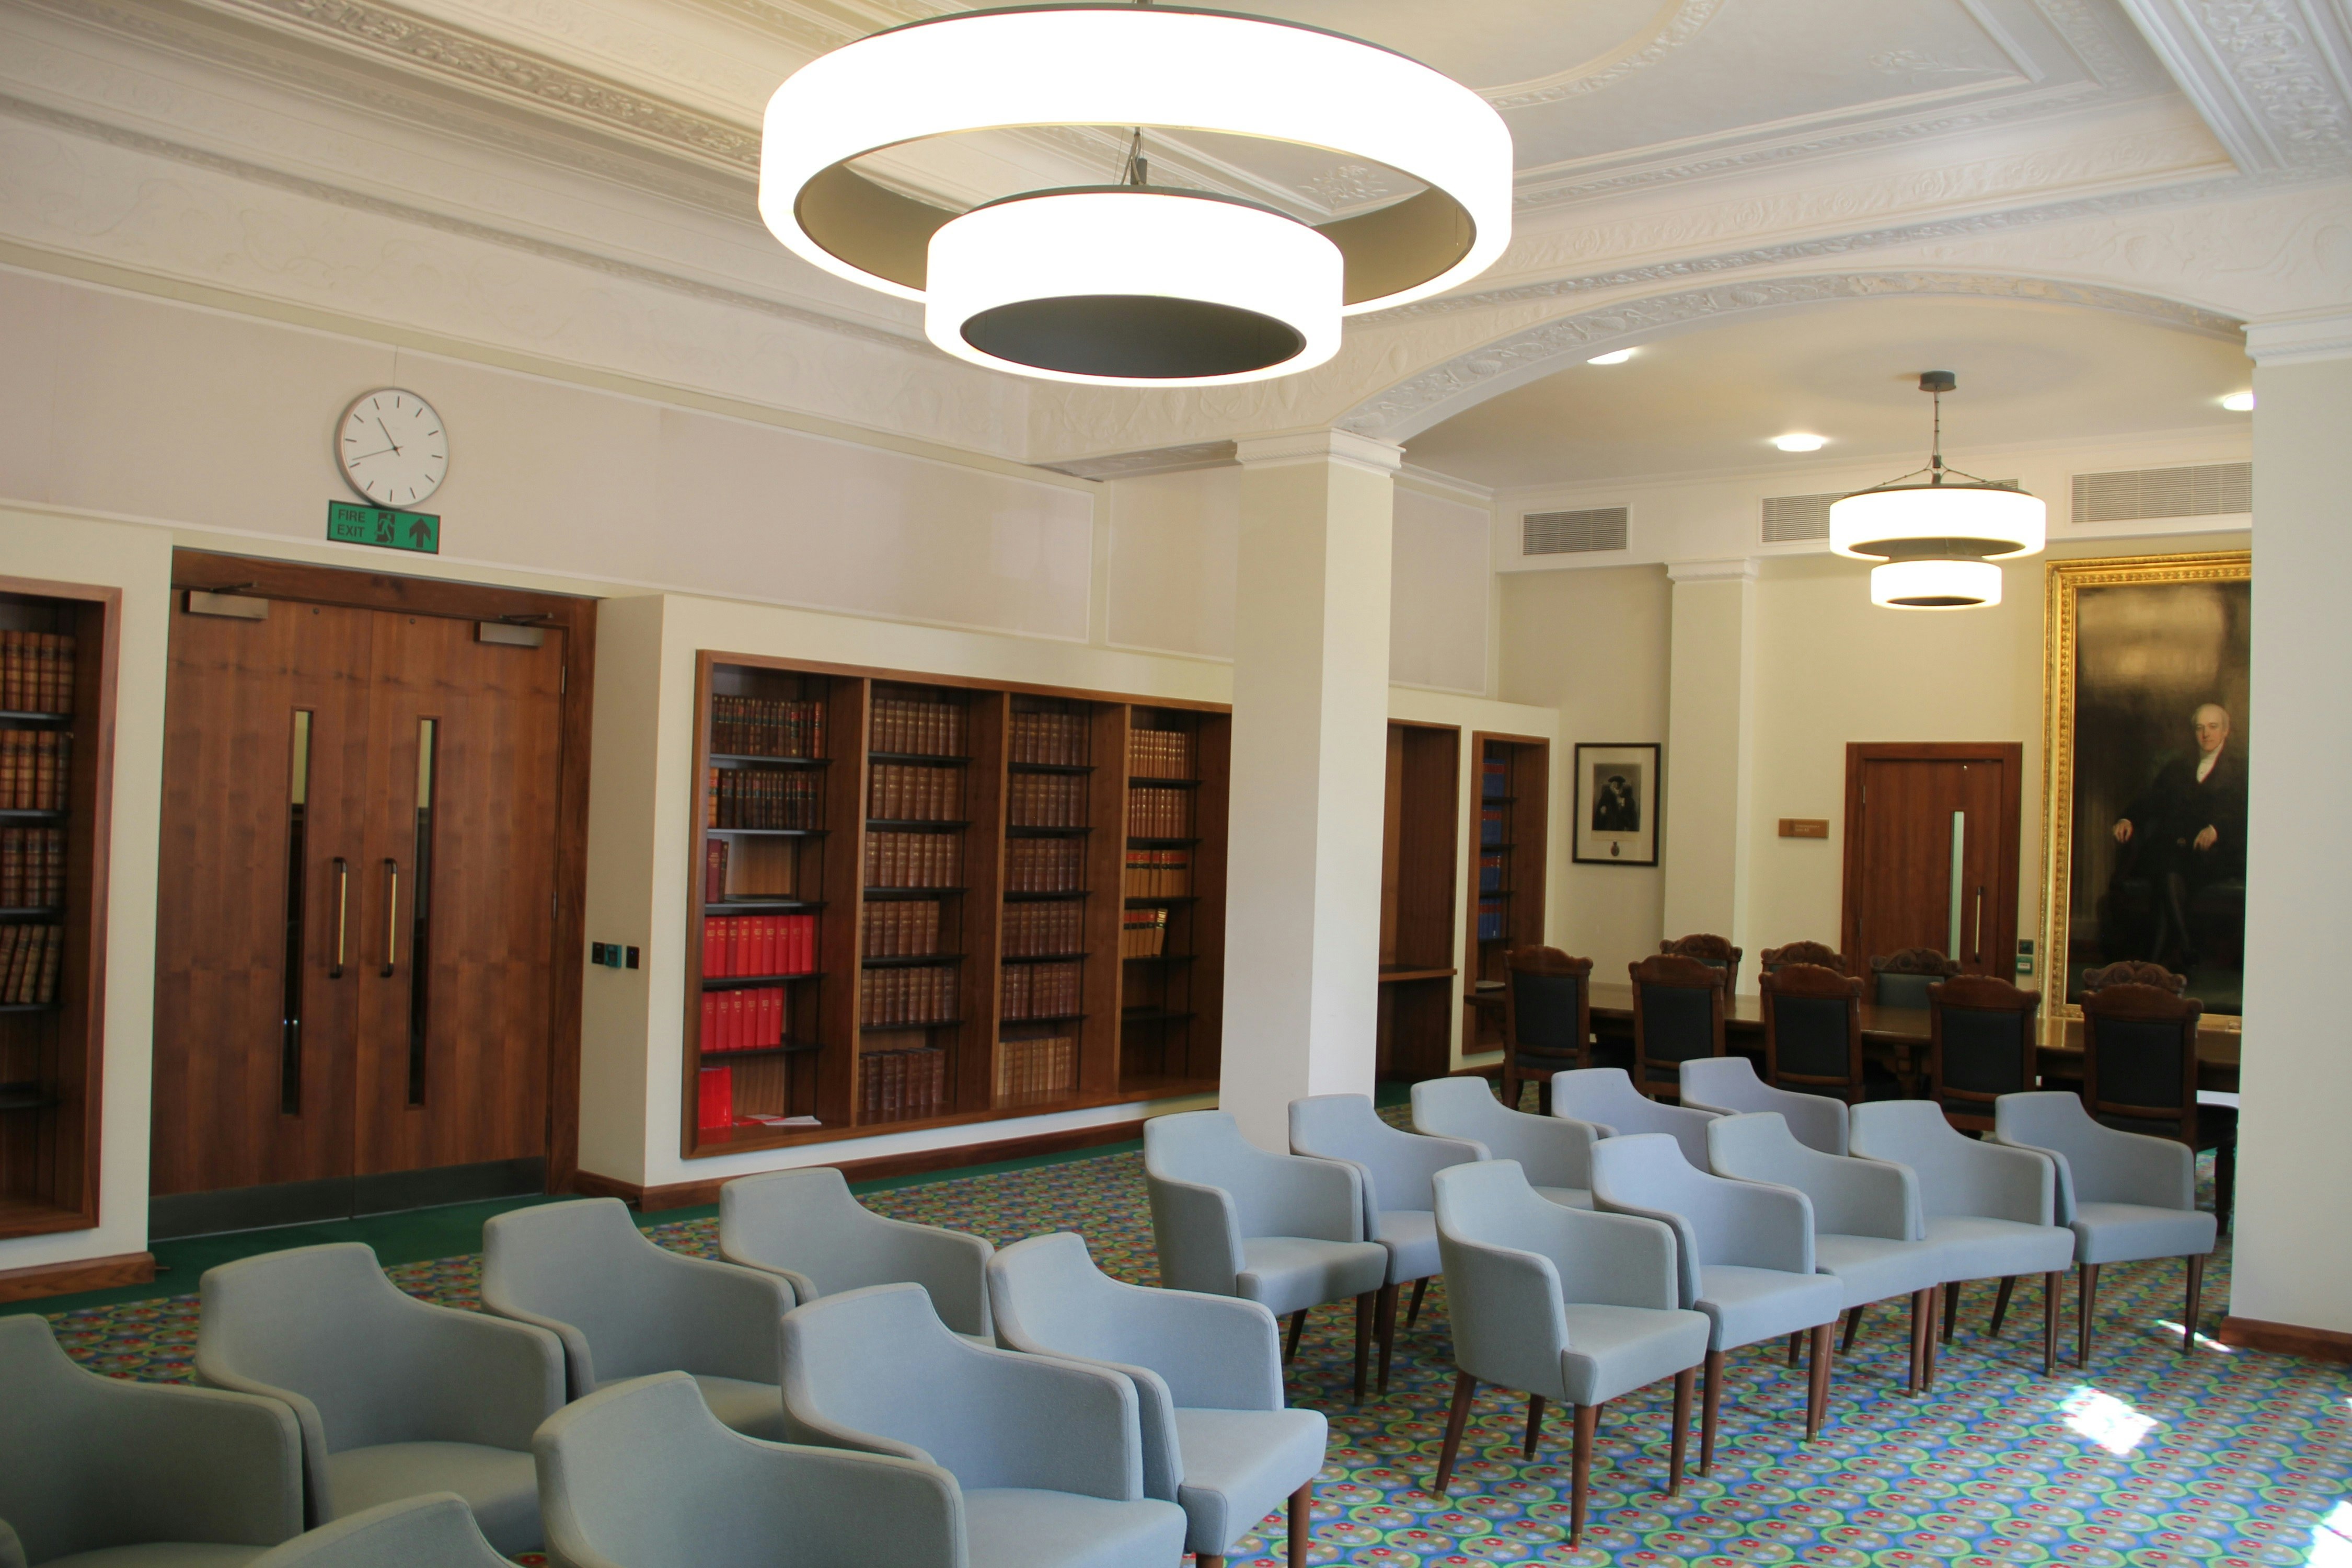 Away Day Venues in North London - The Supreme Court of the United Kingdom